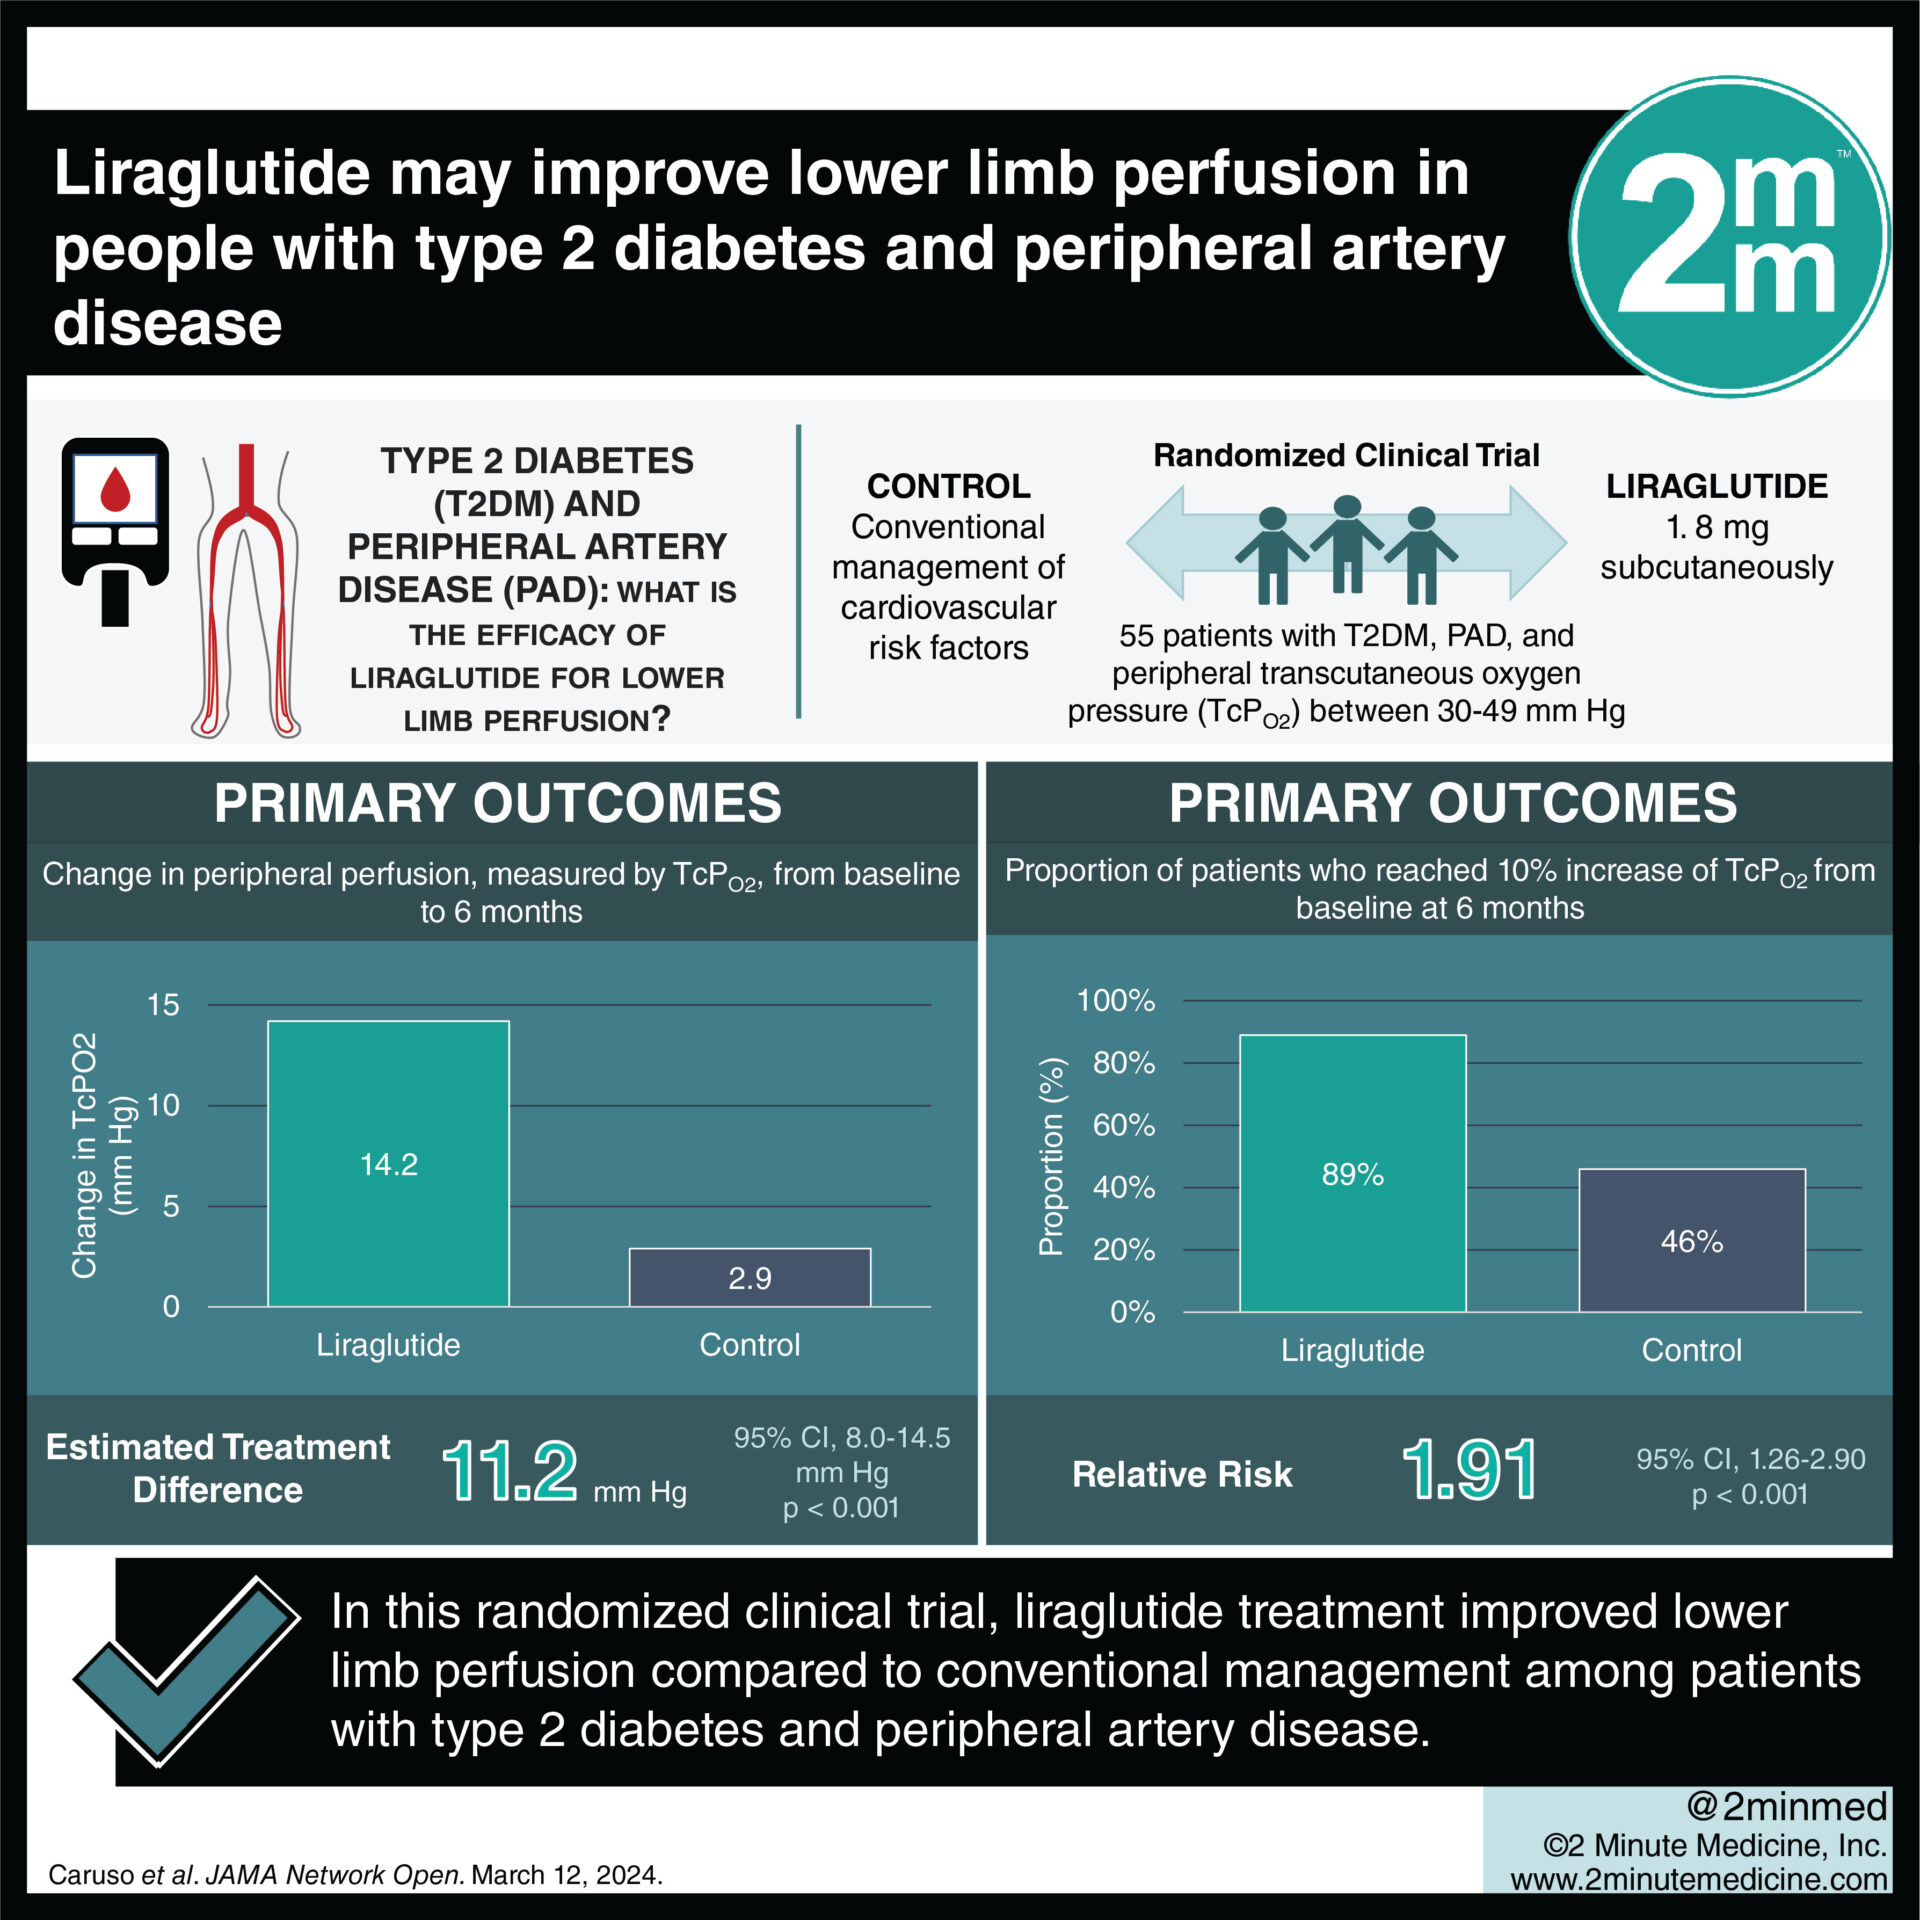 #VisualAbstract: Liraglutide may improve lower limb perfusion in people with type 2 diabetes and peripheral artery disease